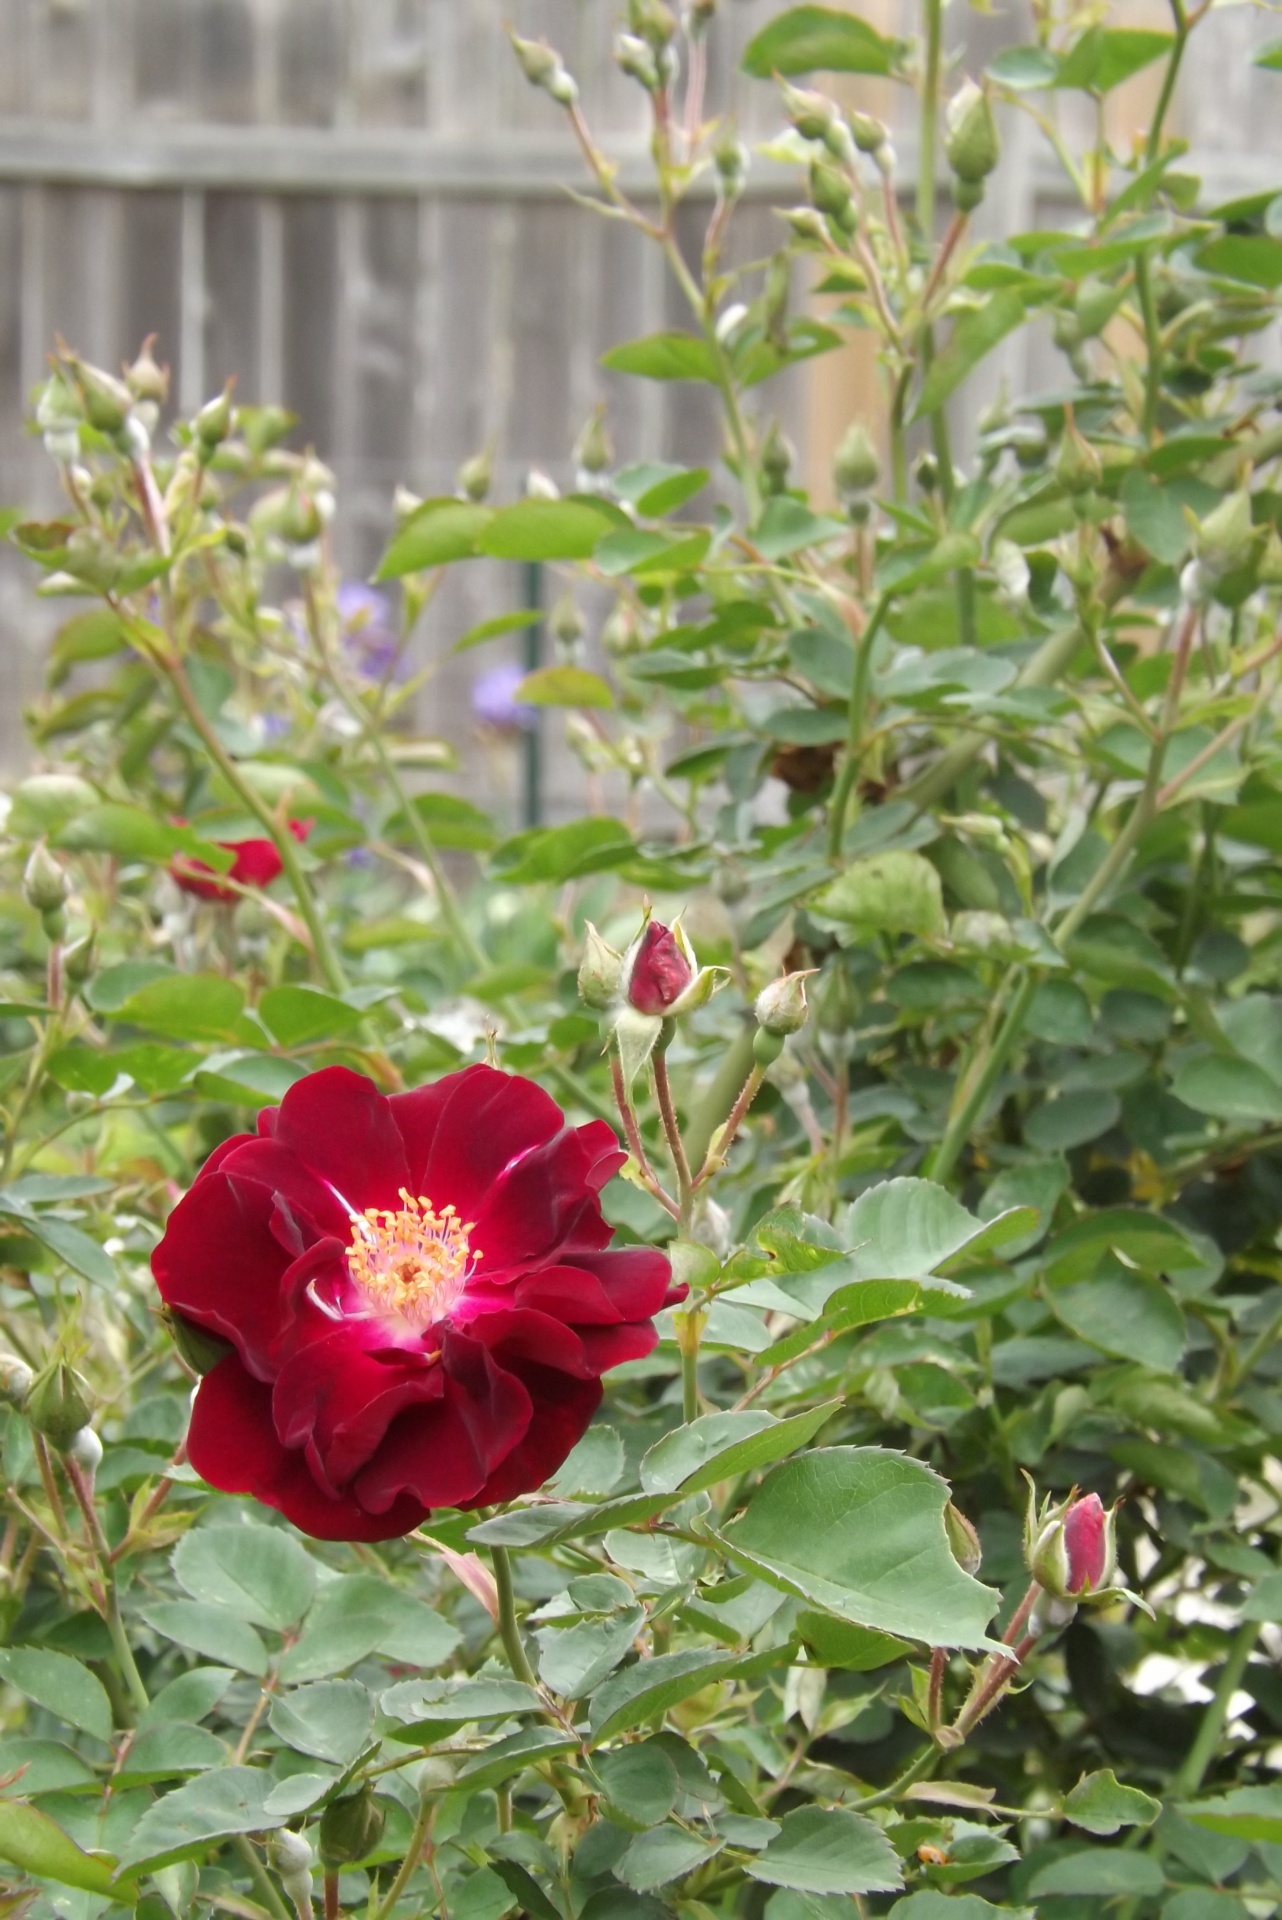 These roses create a wonderful atmosphere for your garden. Once you get them started, they take over the yard and they bloom every spring, bringing a sweet aroma and butterflies.